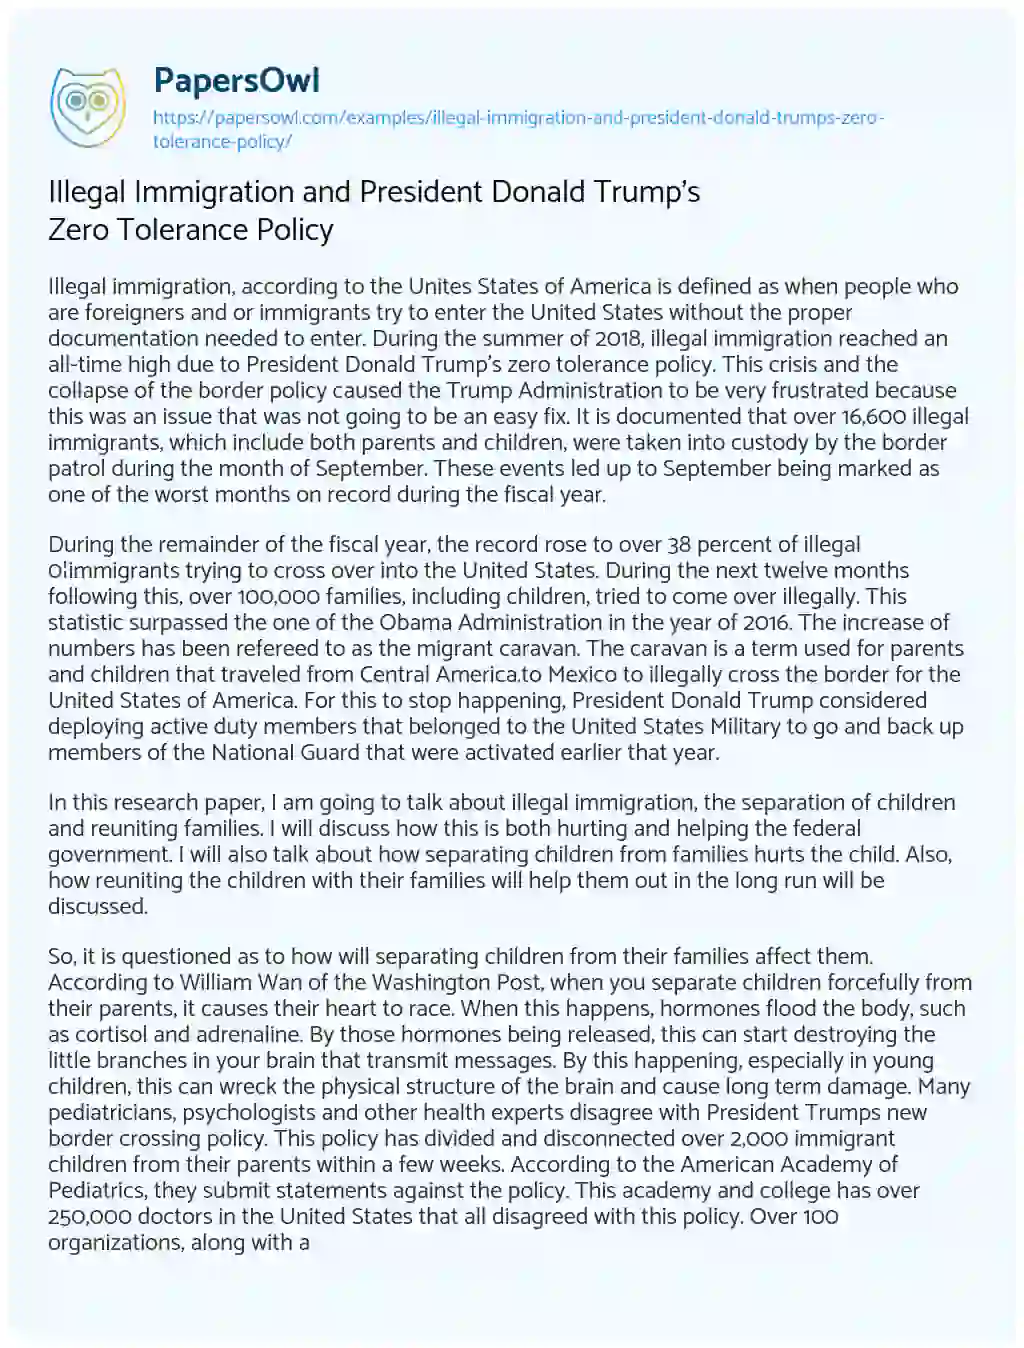 Essay on Illegal Immigration and President Donald Trump’s Zero Tolerance Policy